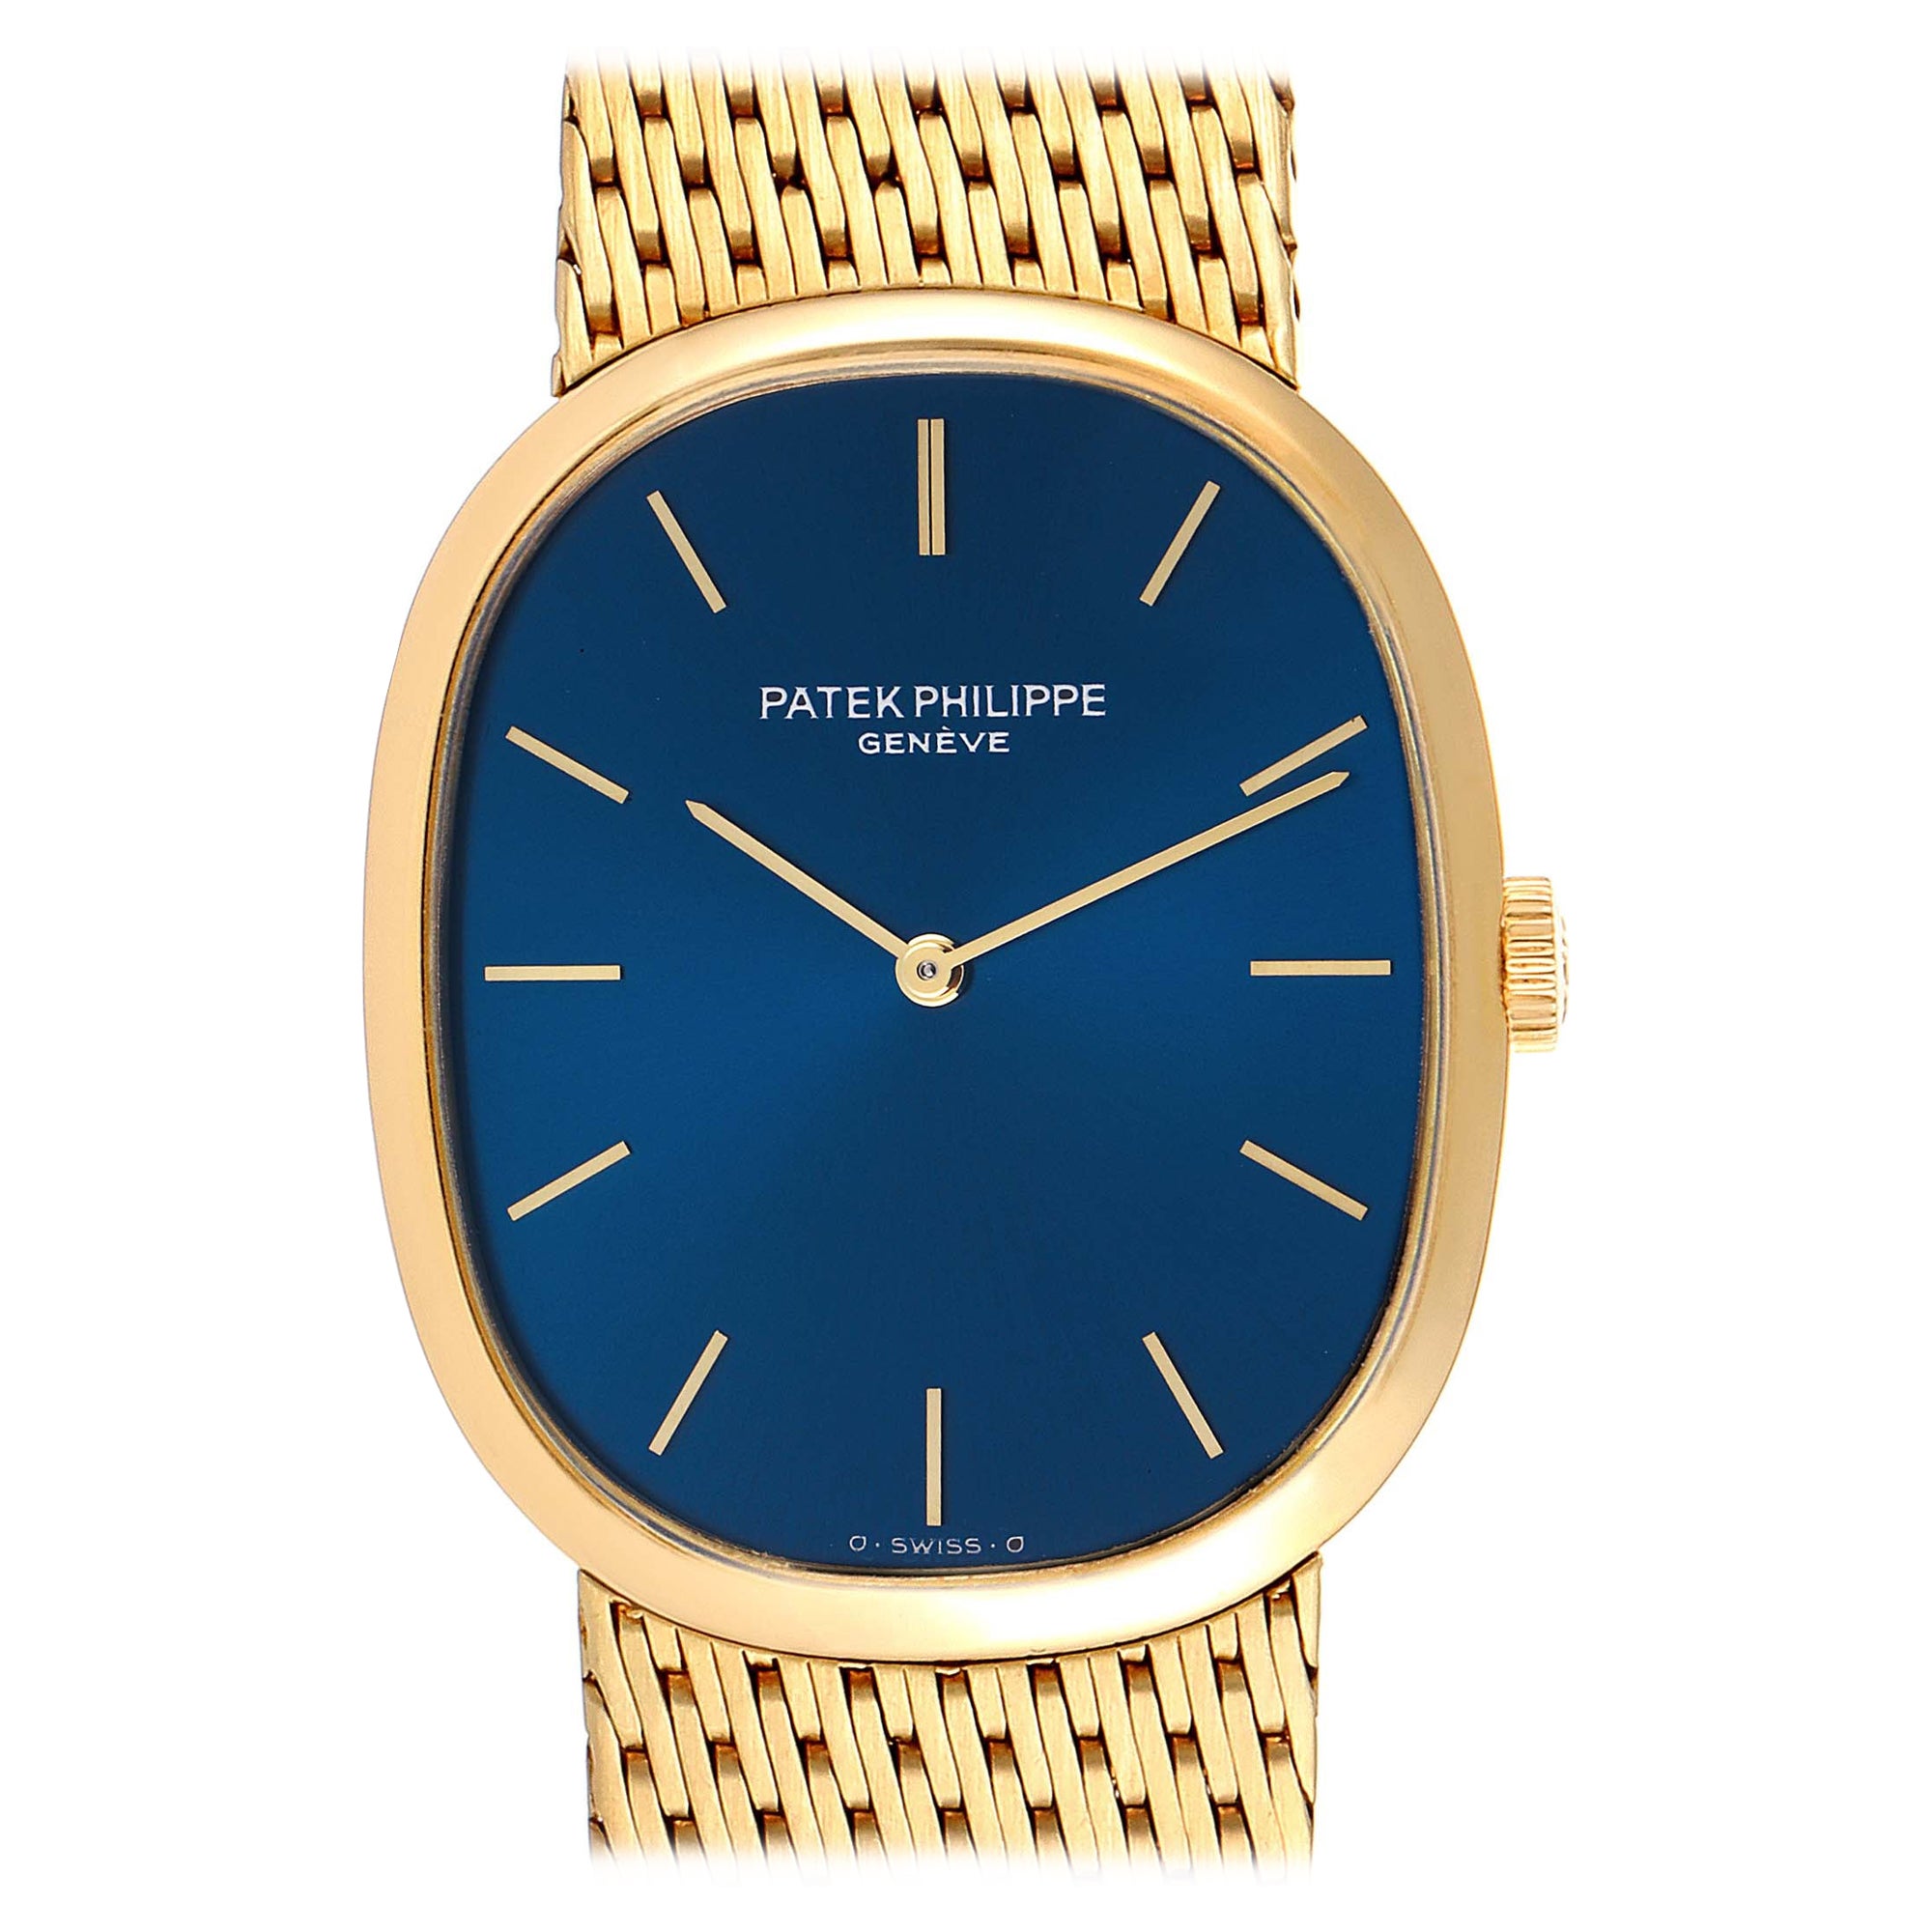 Patek Philippe Golden Ellipse 18k Yellow Gold Blue Dial Watch 3748 For Sale